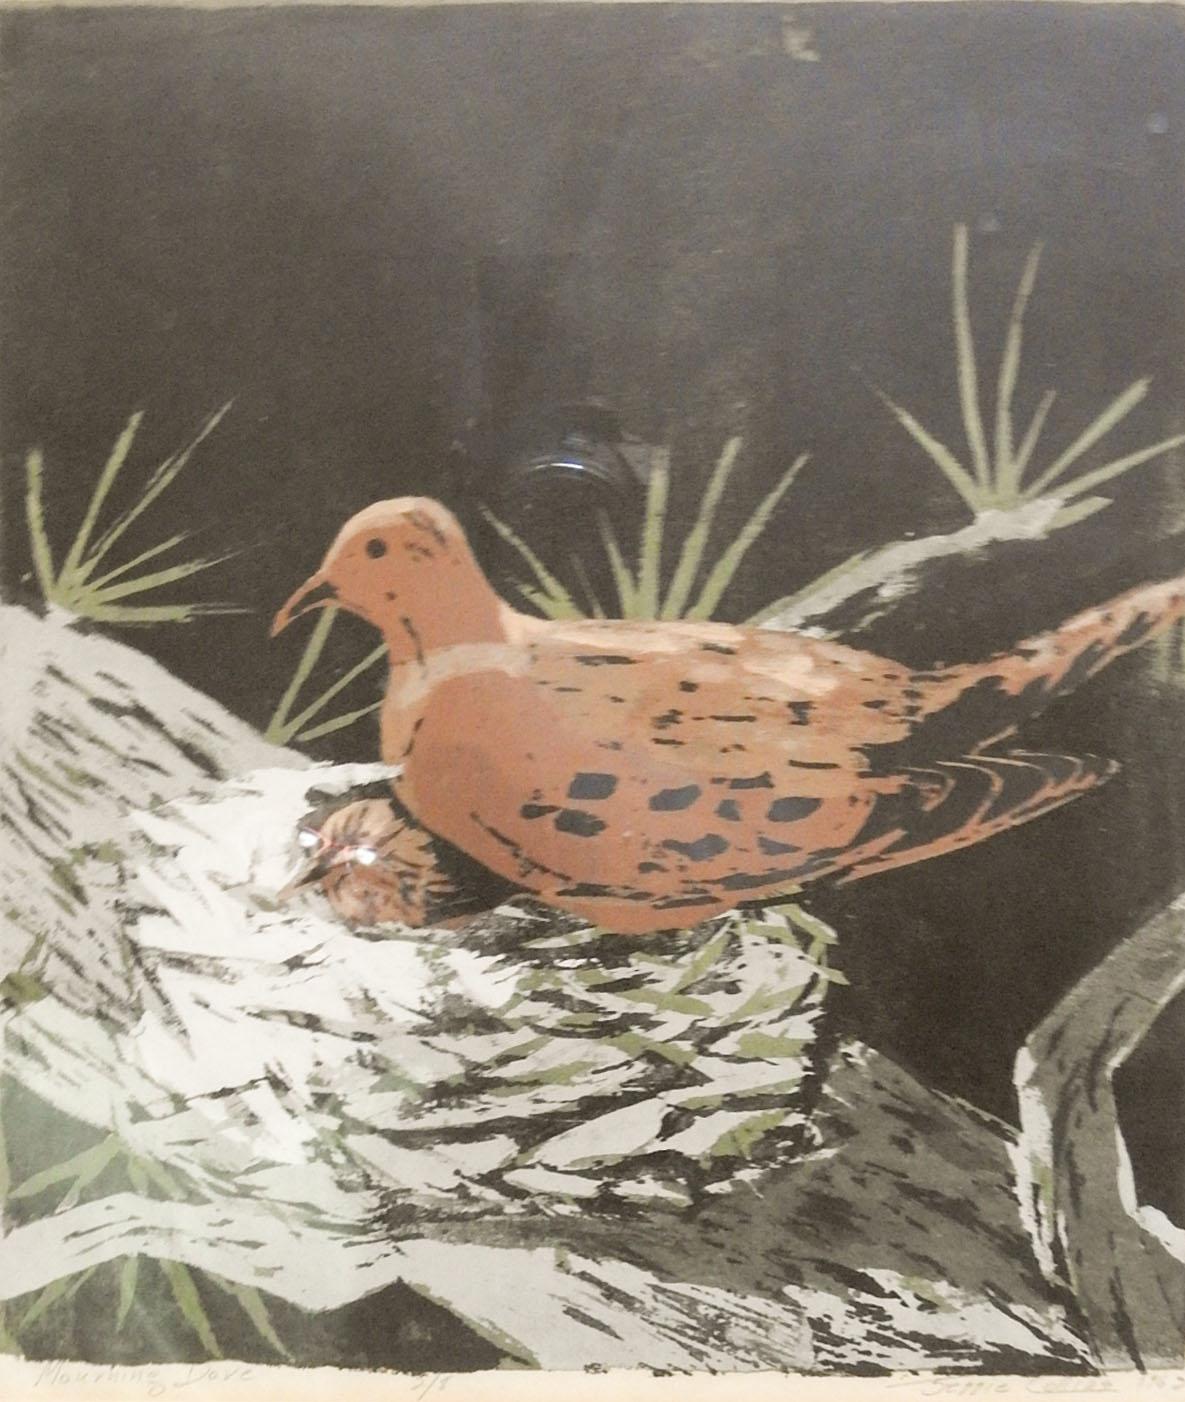 Serigraph on paper by Jessie Collins (20th Century) American. Signed, dated 1962, titled Mourning Dove and numbered 2/8 in pencil along lower margin. Displayed under glass and mat in narrow wood frame, opening size 12.5